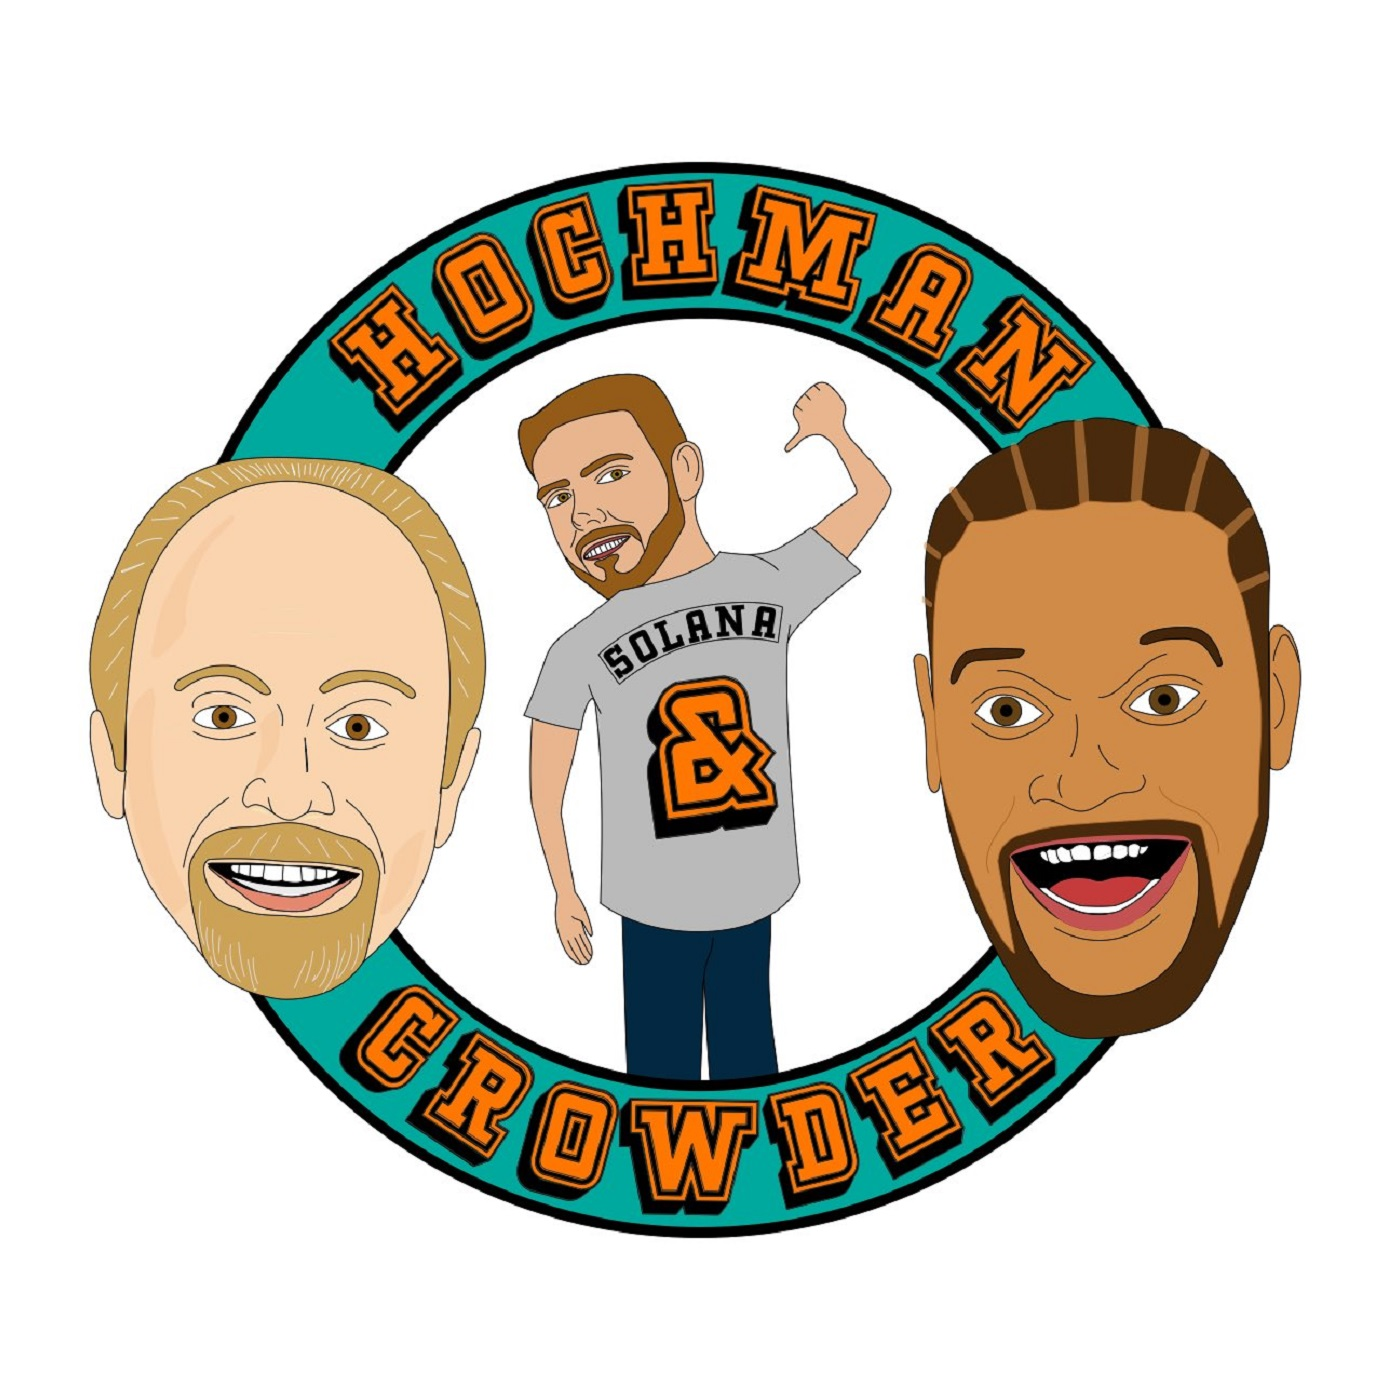 11-08-2019 - Hoch and Crowder Podcast Hour 2